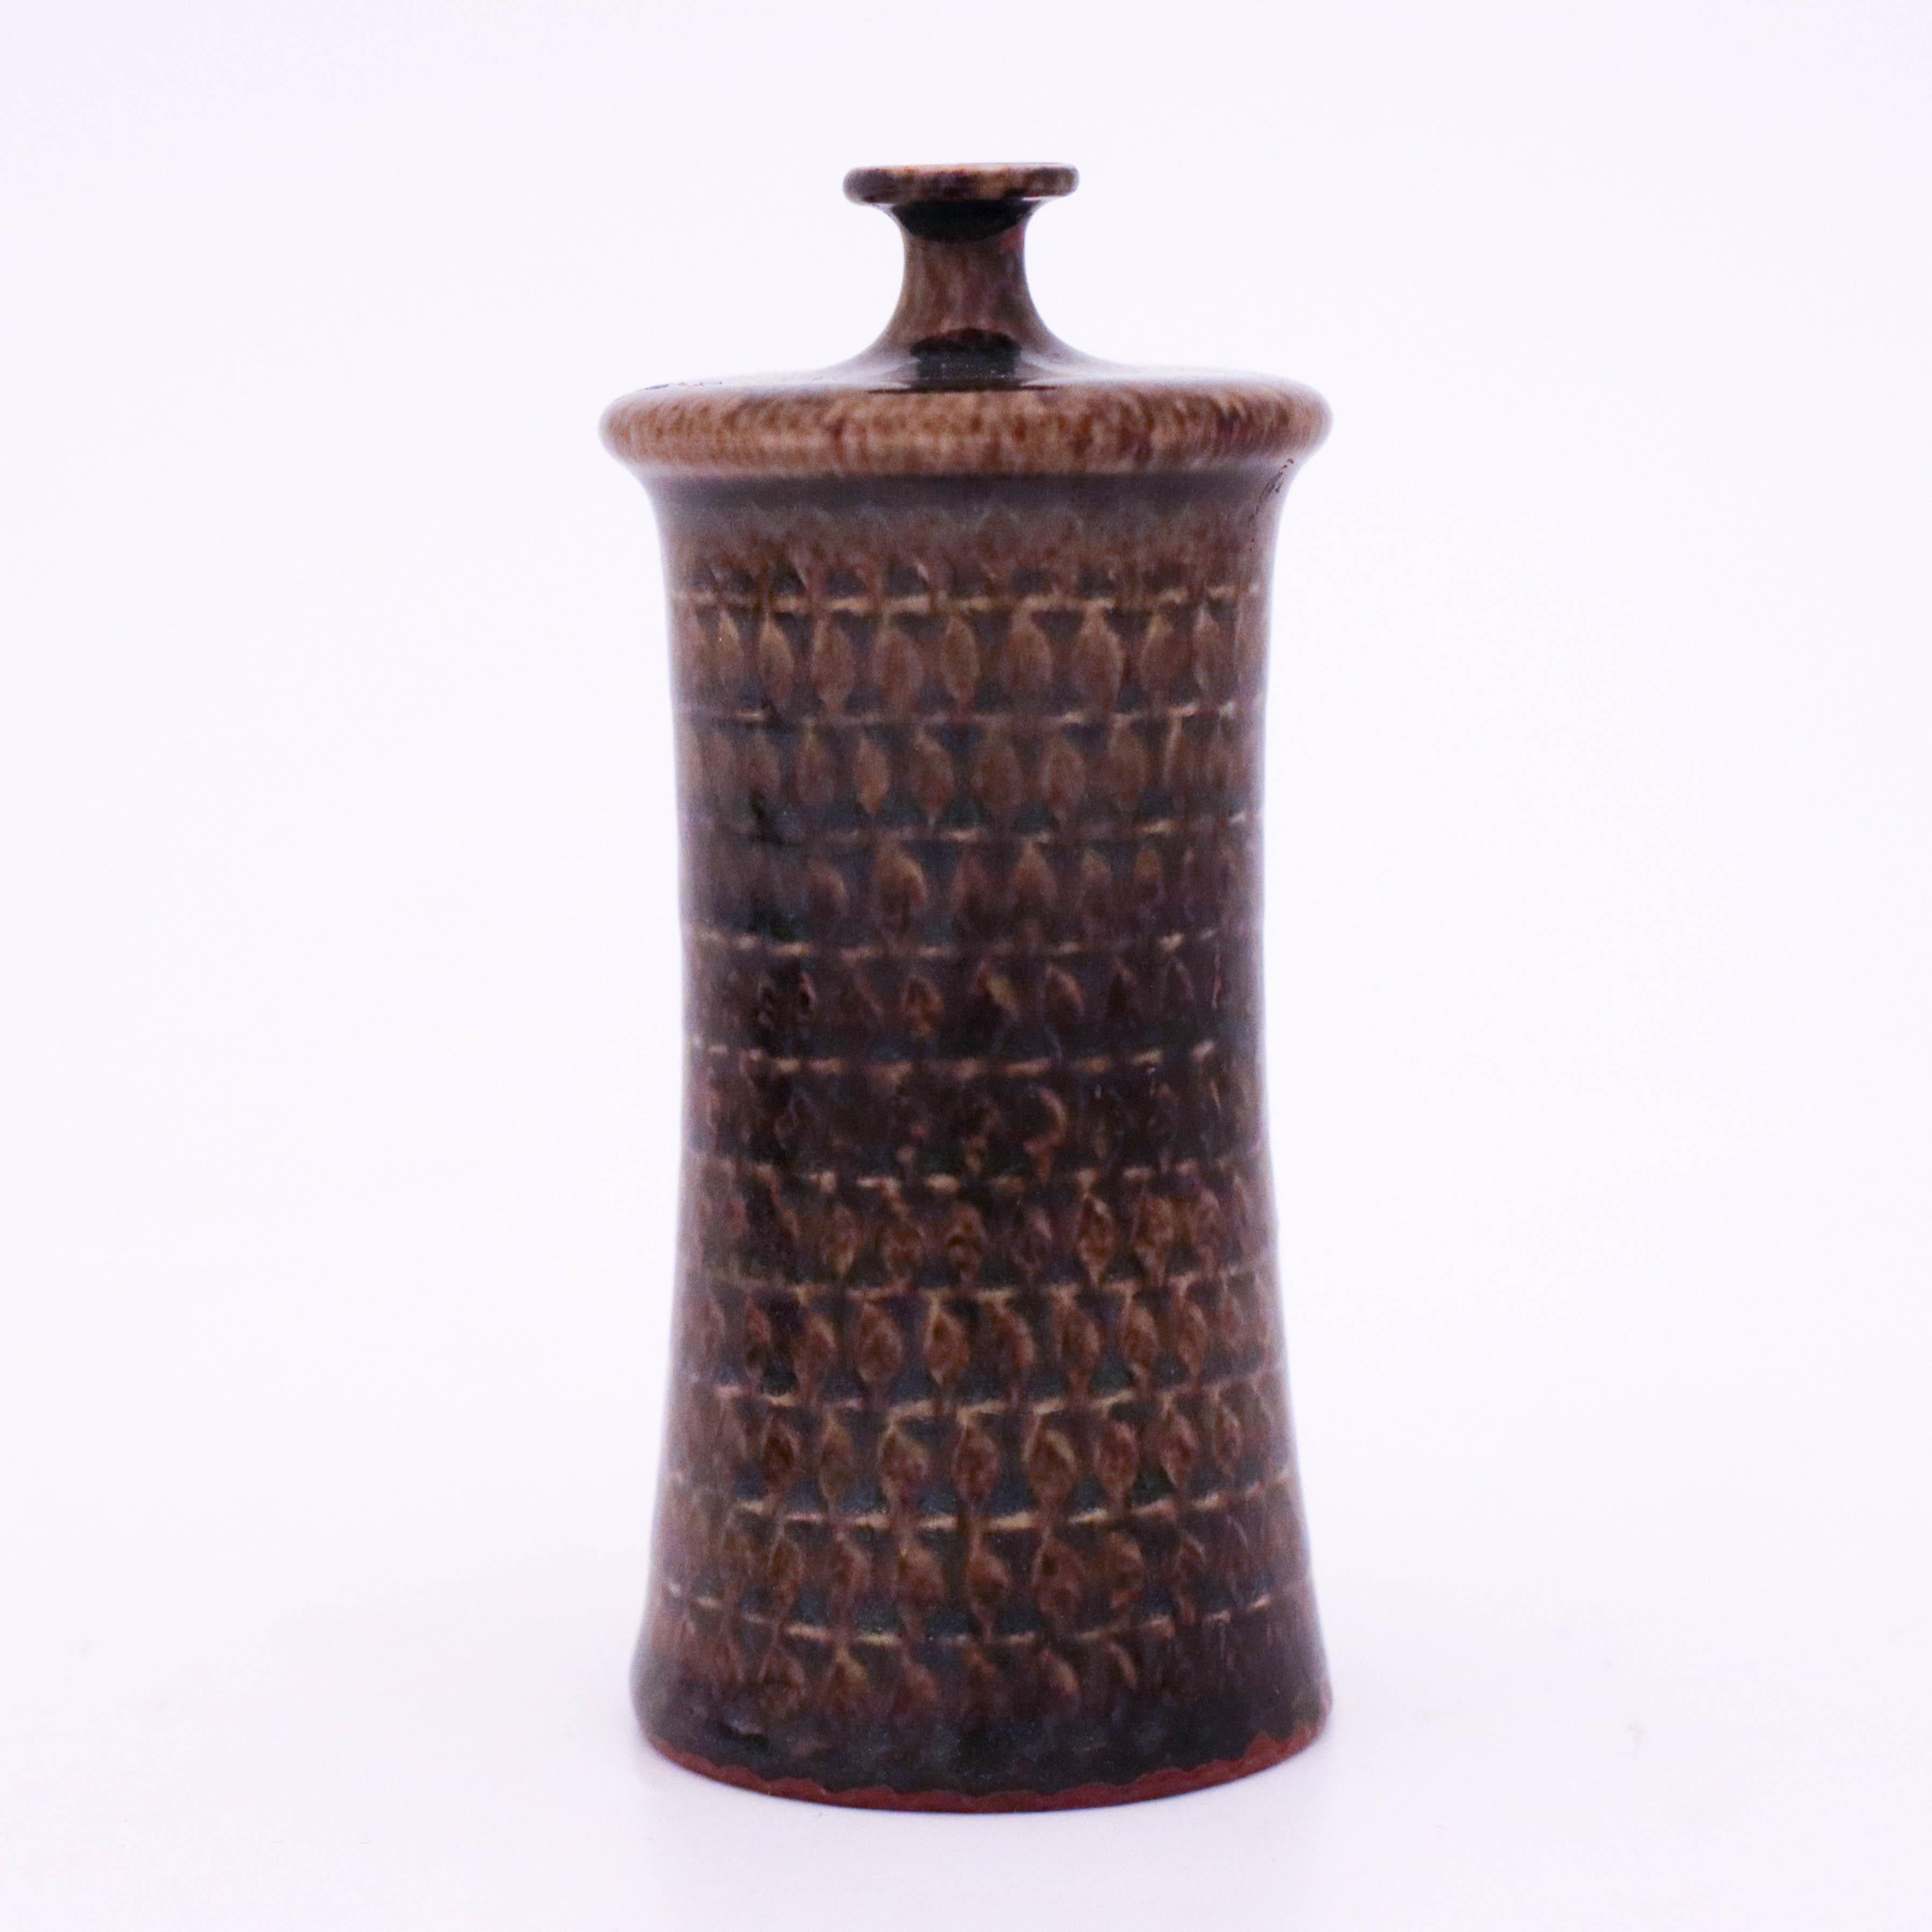 A brown vase designed by Stig Lindberg at Gustavsberg. It is 11 cm high and 5 cm in diameter and in very good condition. The vase is designed in the 1950s.